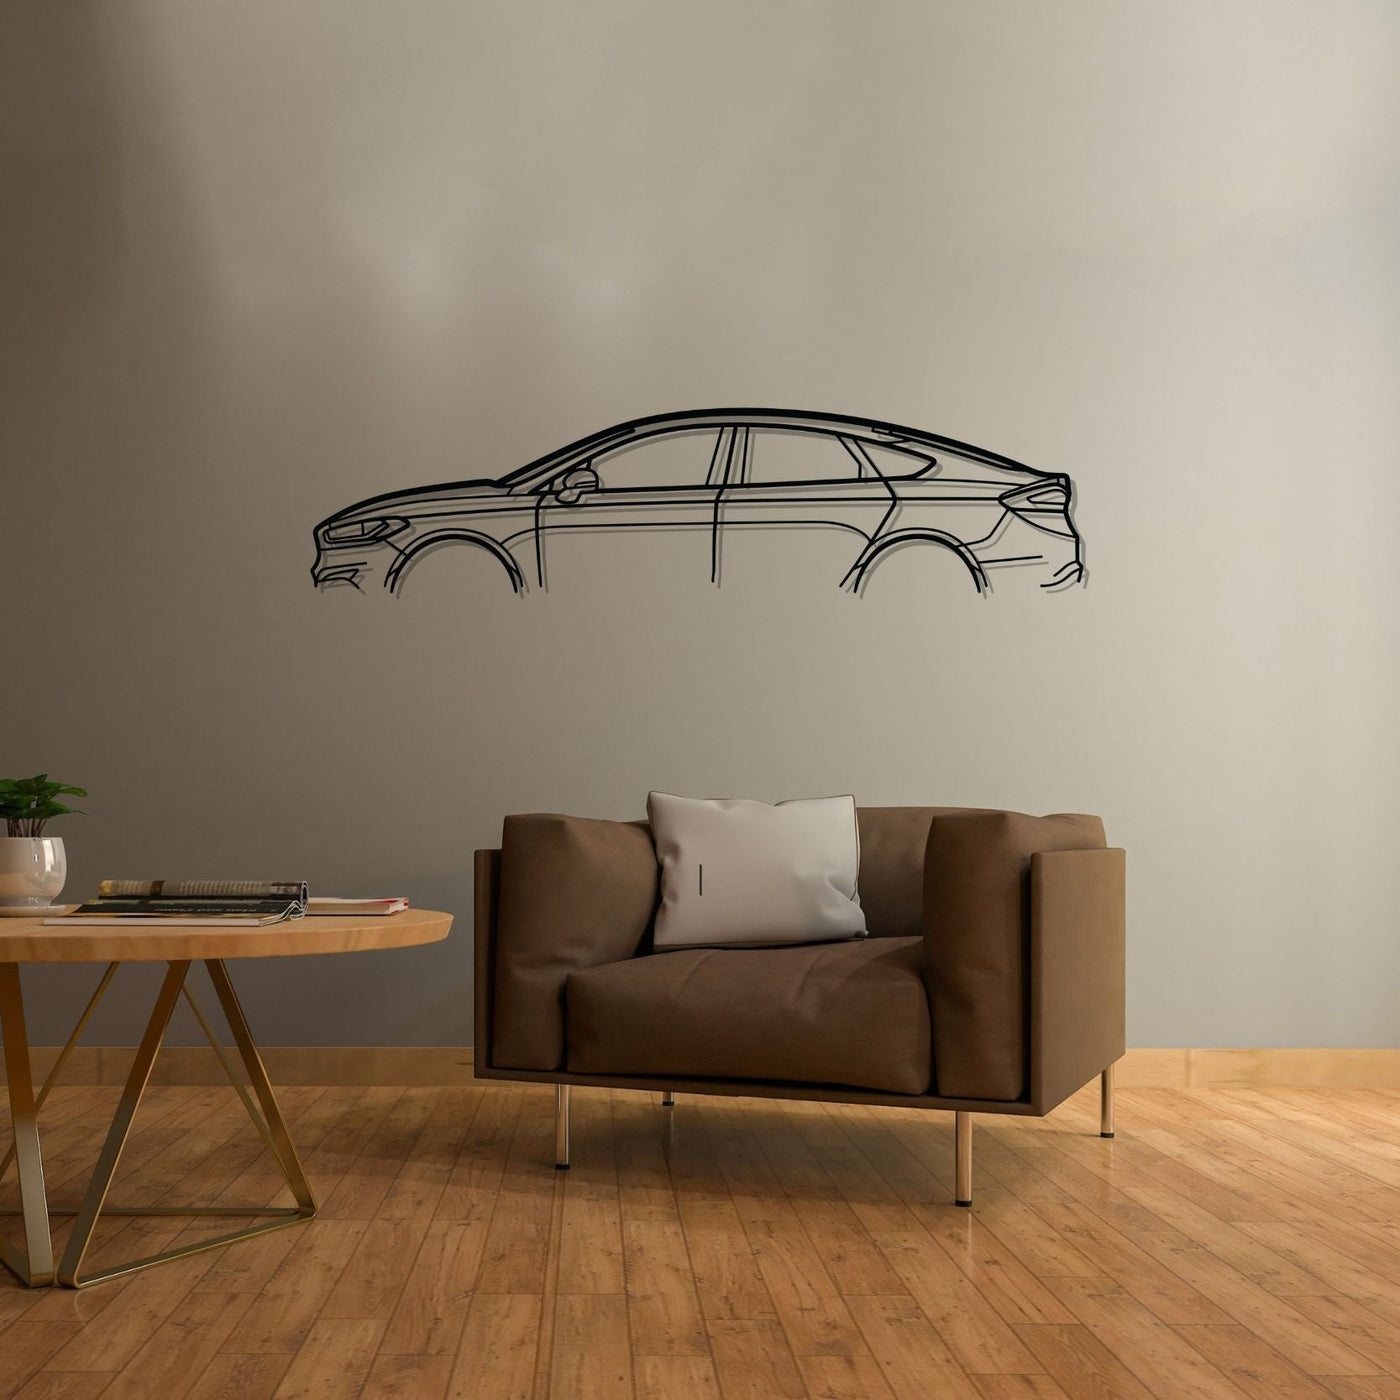 Mondeo Fusion 2015 Classic Silhouette Metal Wall Art